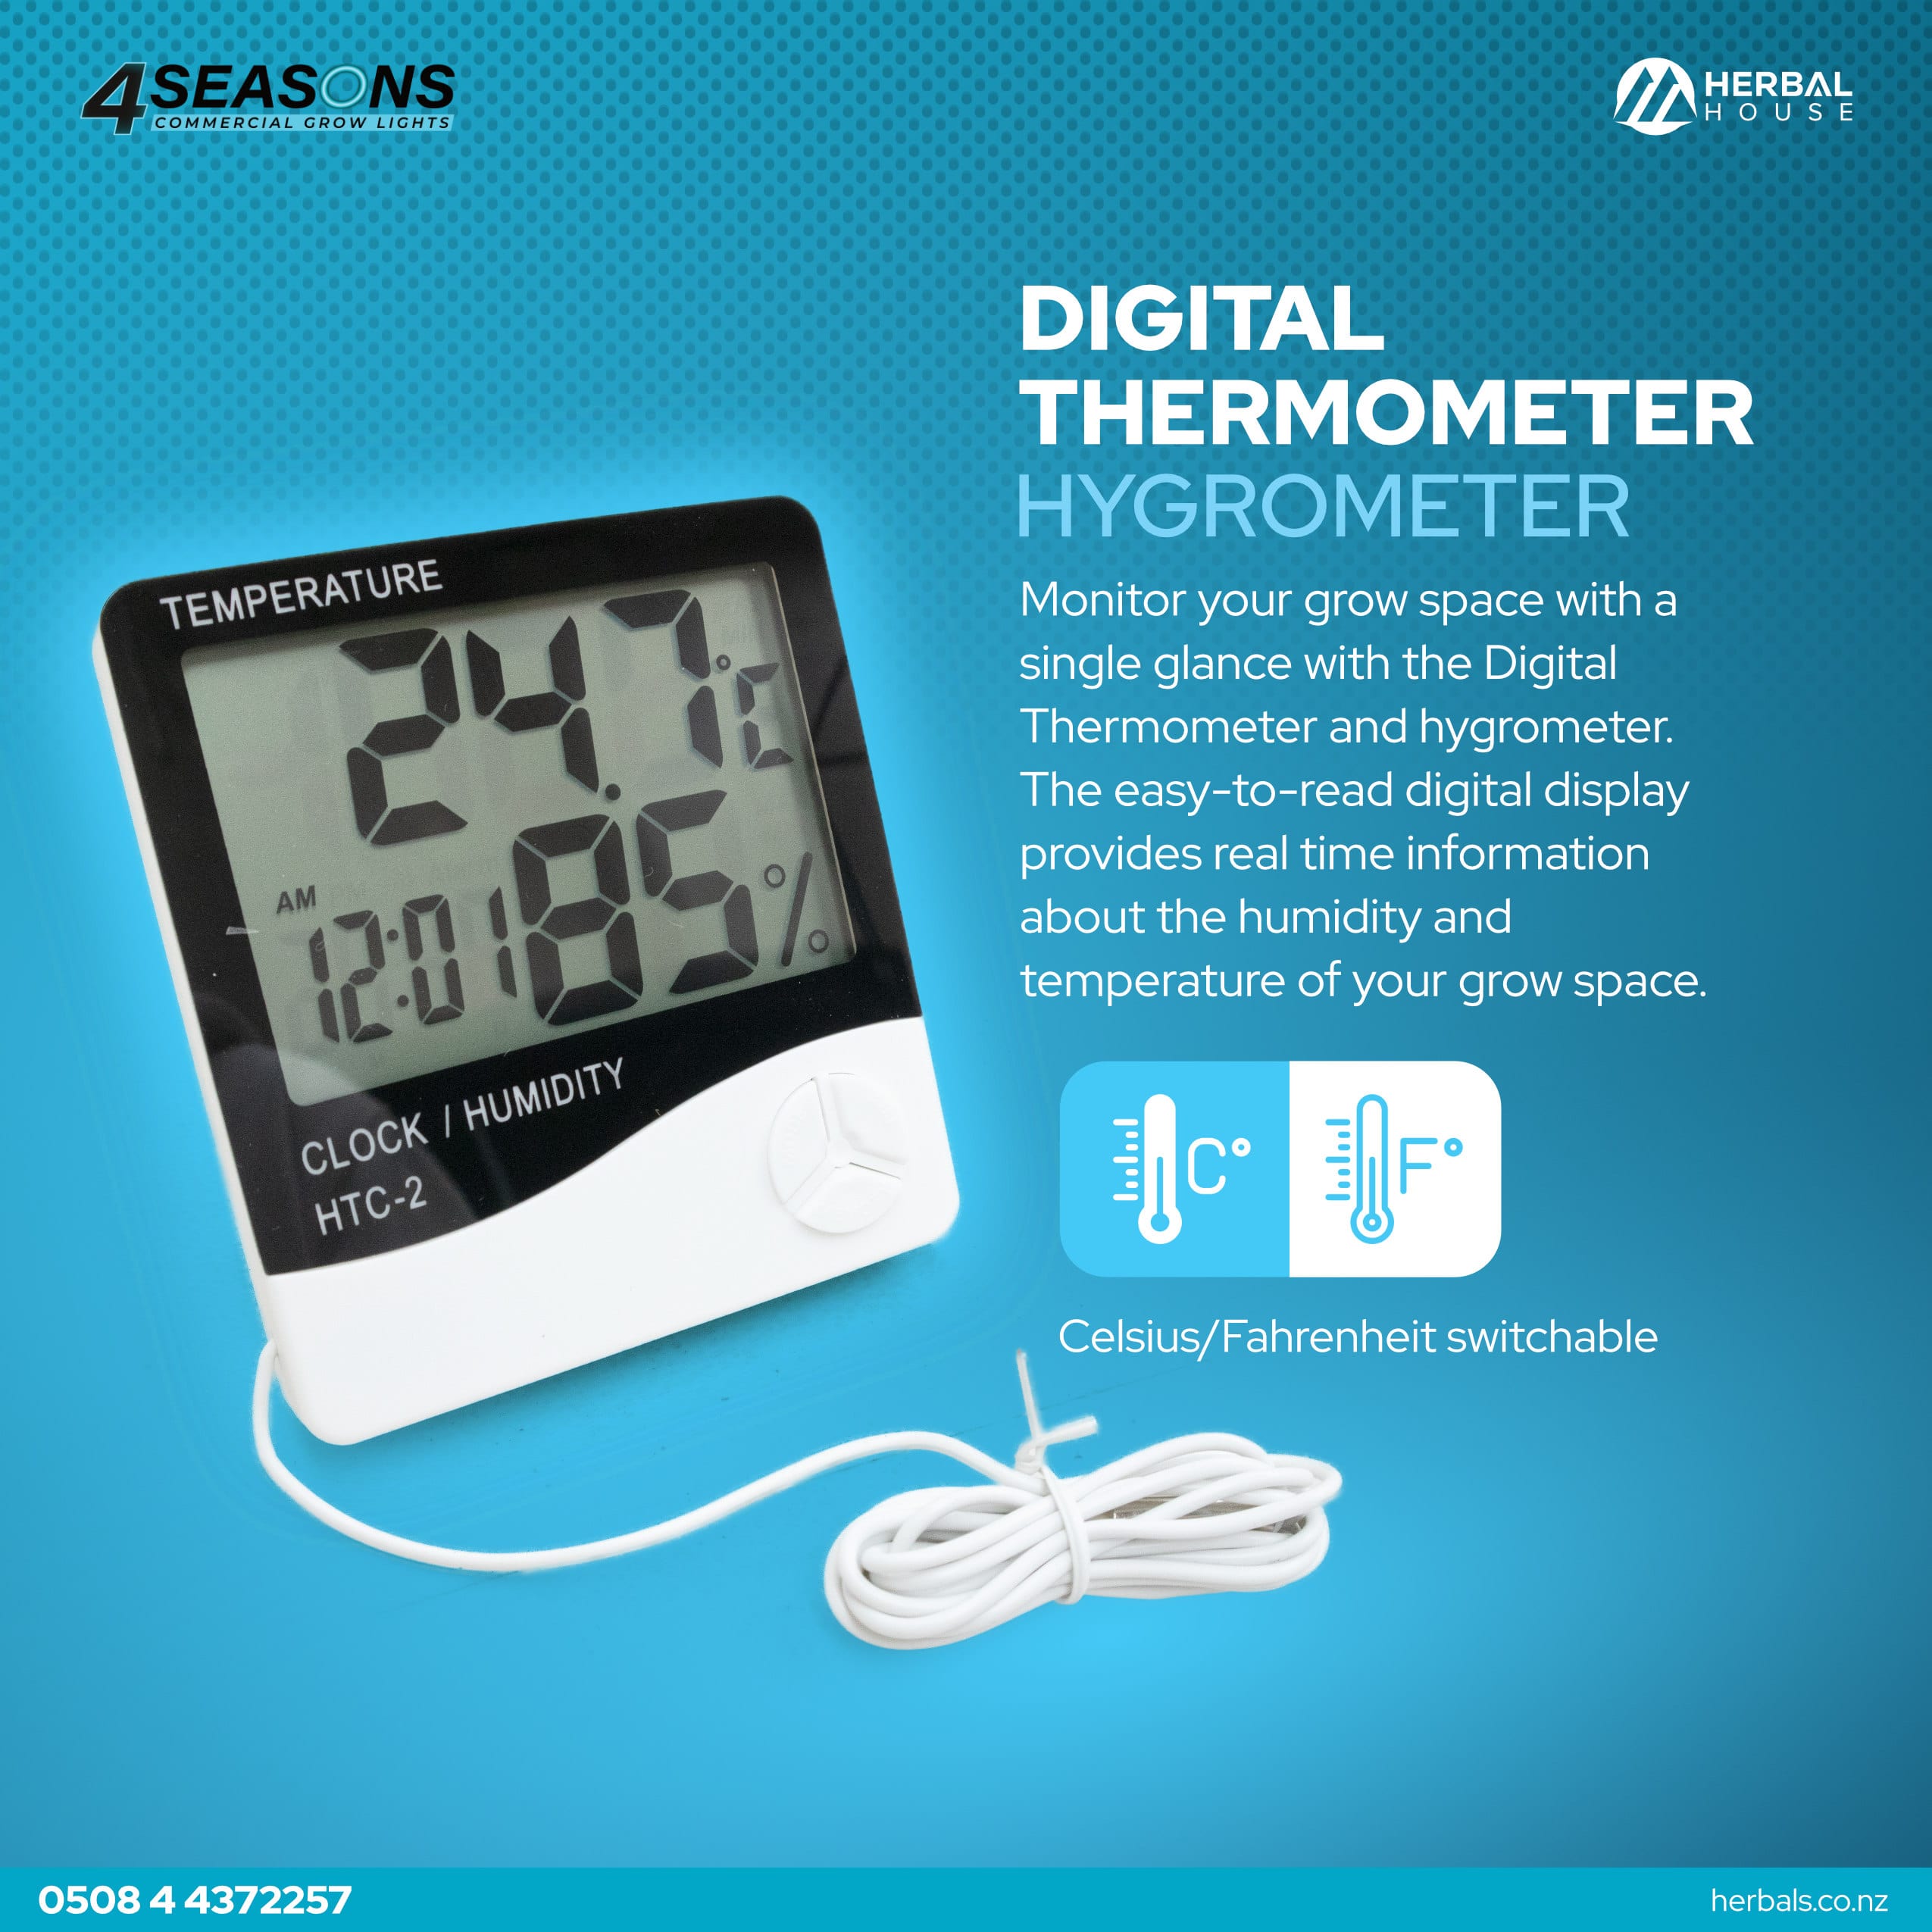 Digital Window or Wall Thermometer - House Shaped Indoor Outdoor  Temperature Meter with Digital Display in Celsius or Fahrenheit